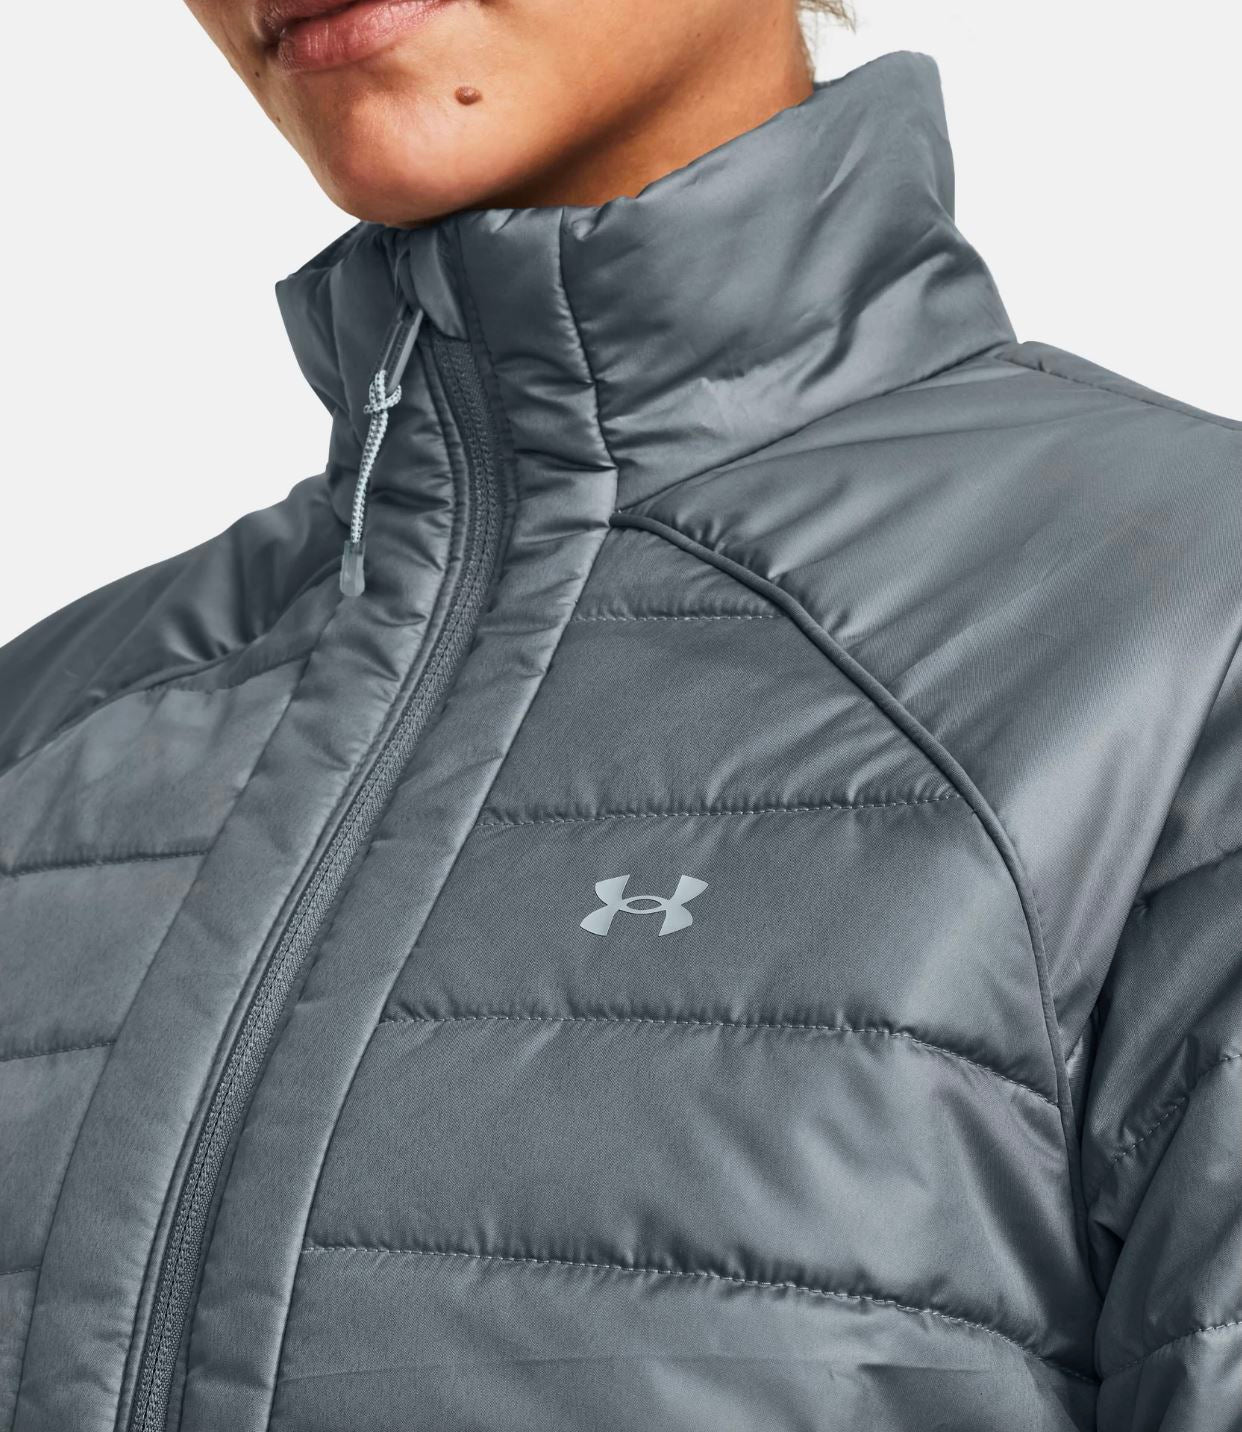 Under Armour Women's Storm Insulated Jacket